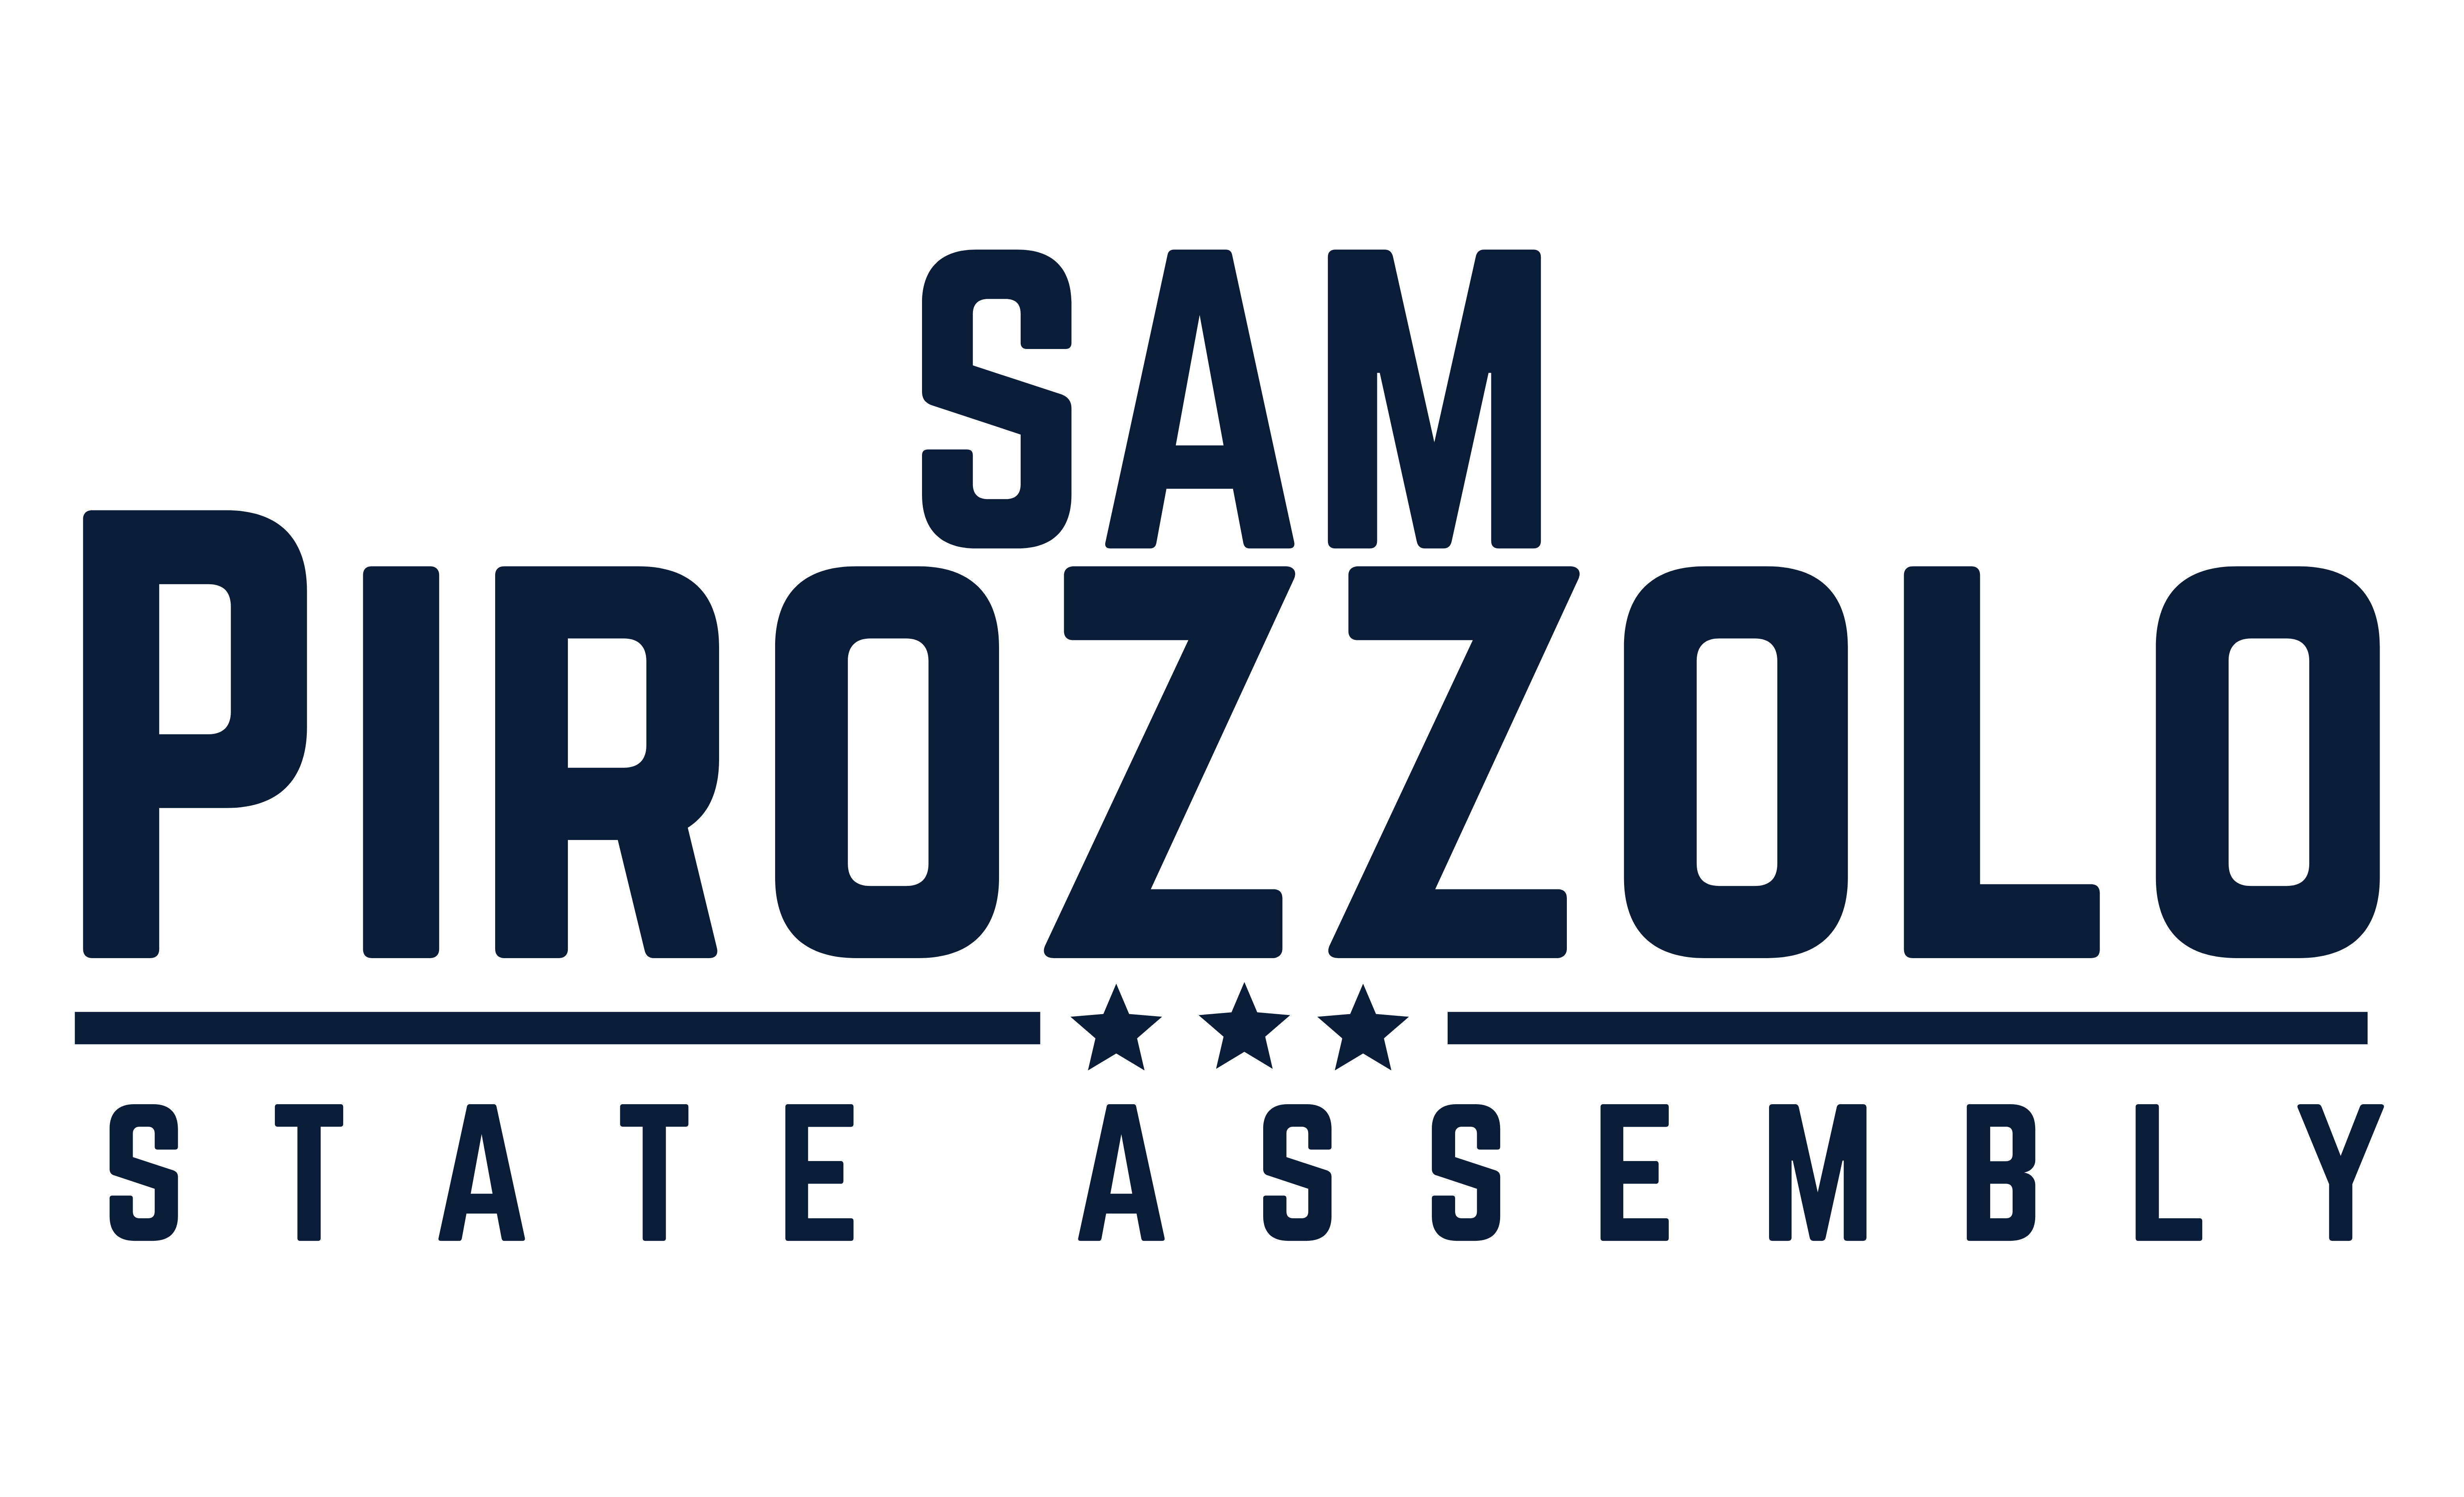 Sam Pirozzolo for Assembly